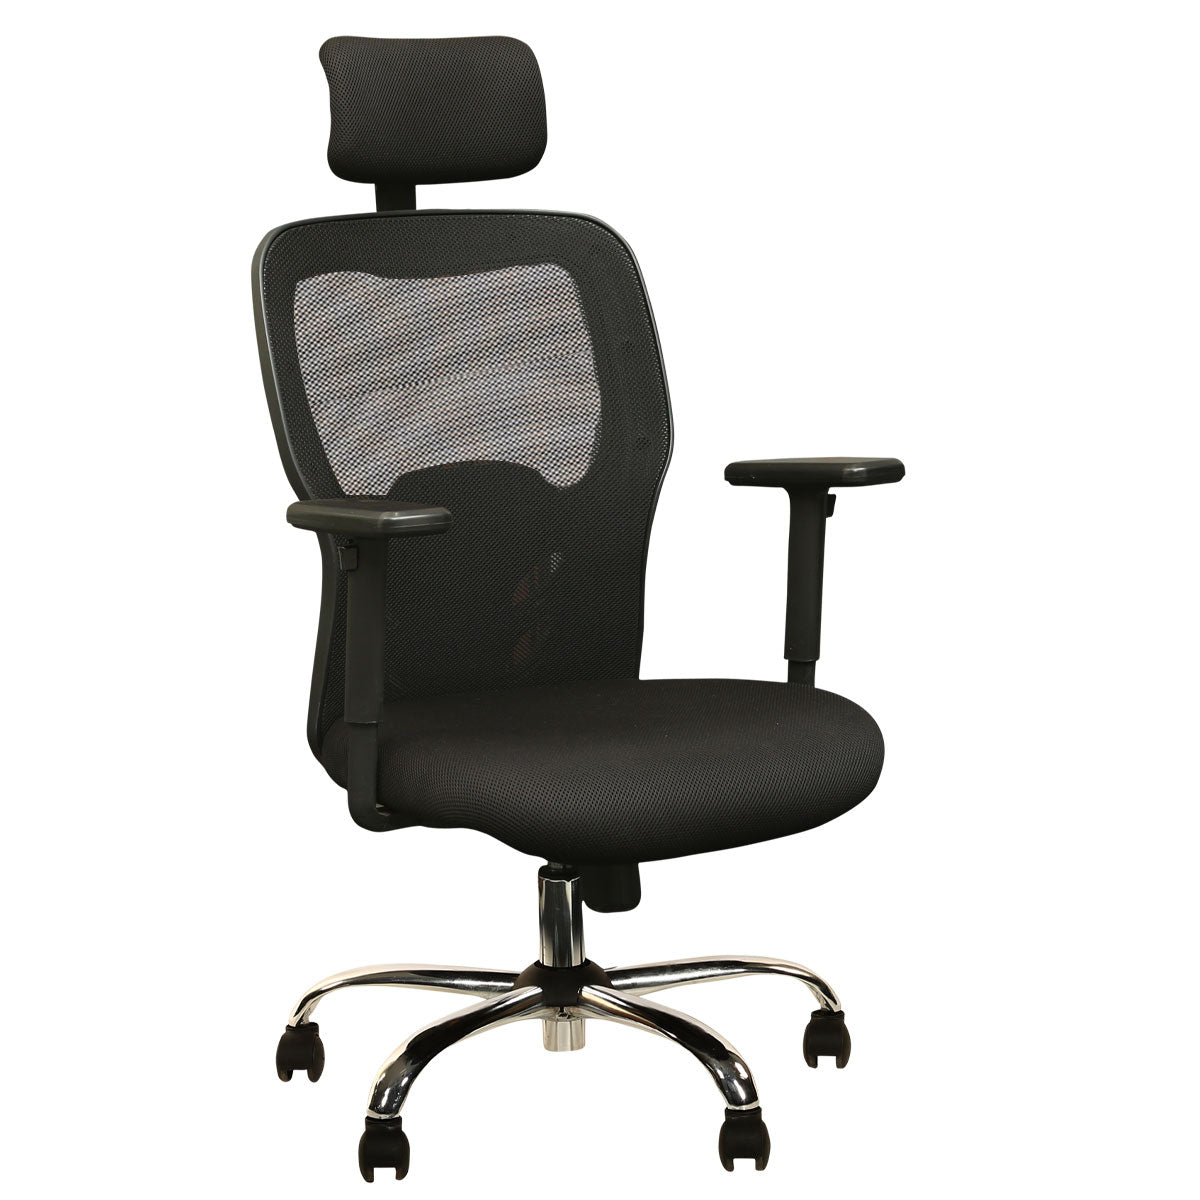 David High Back Work Station Office Chair with Chrome Base -Black